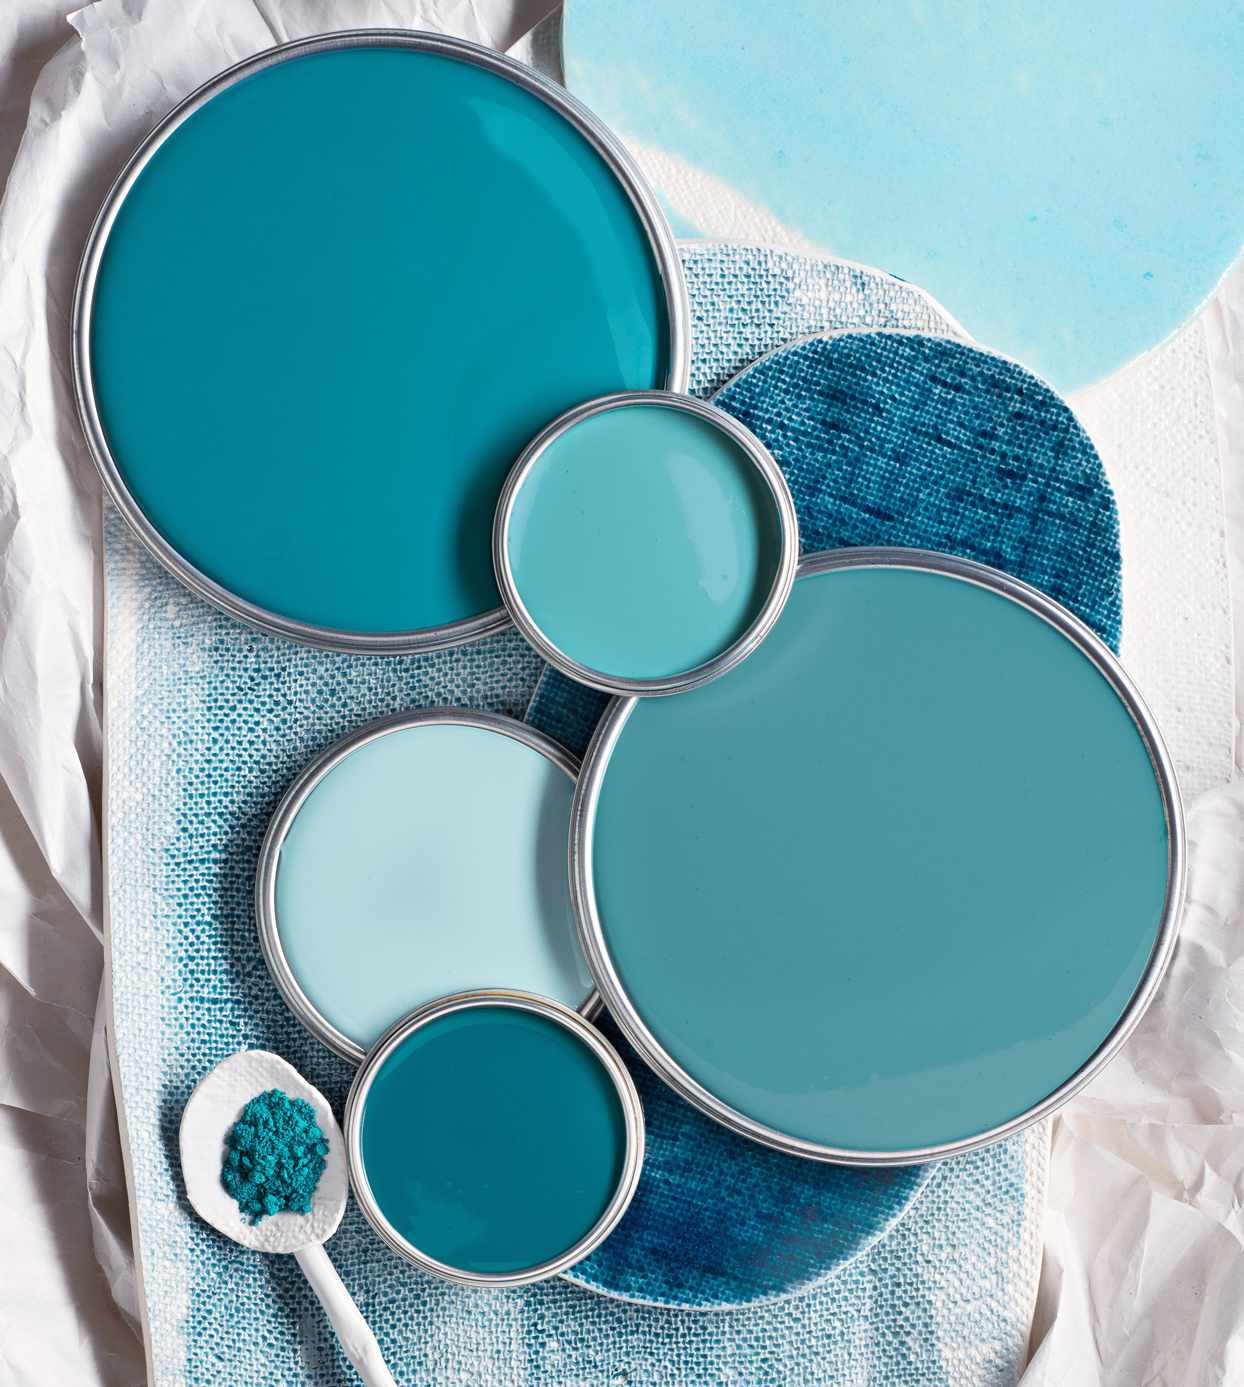 teal paint swatches Cheaper Than Retail Price> Buy Clothing